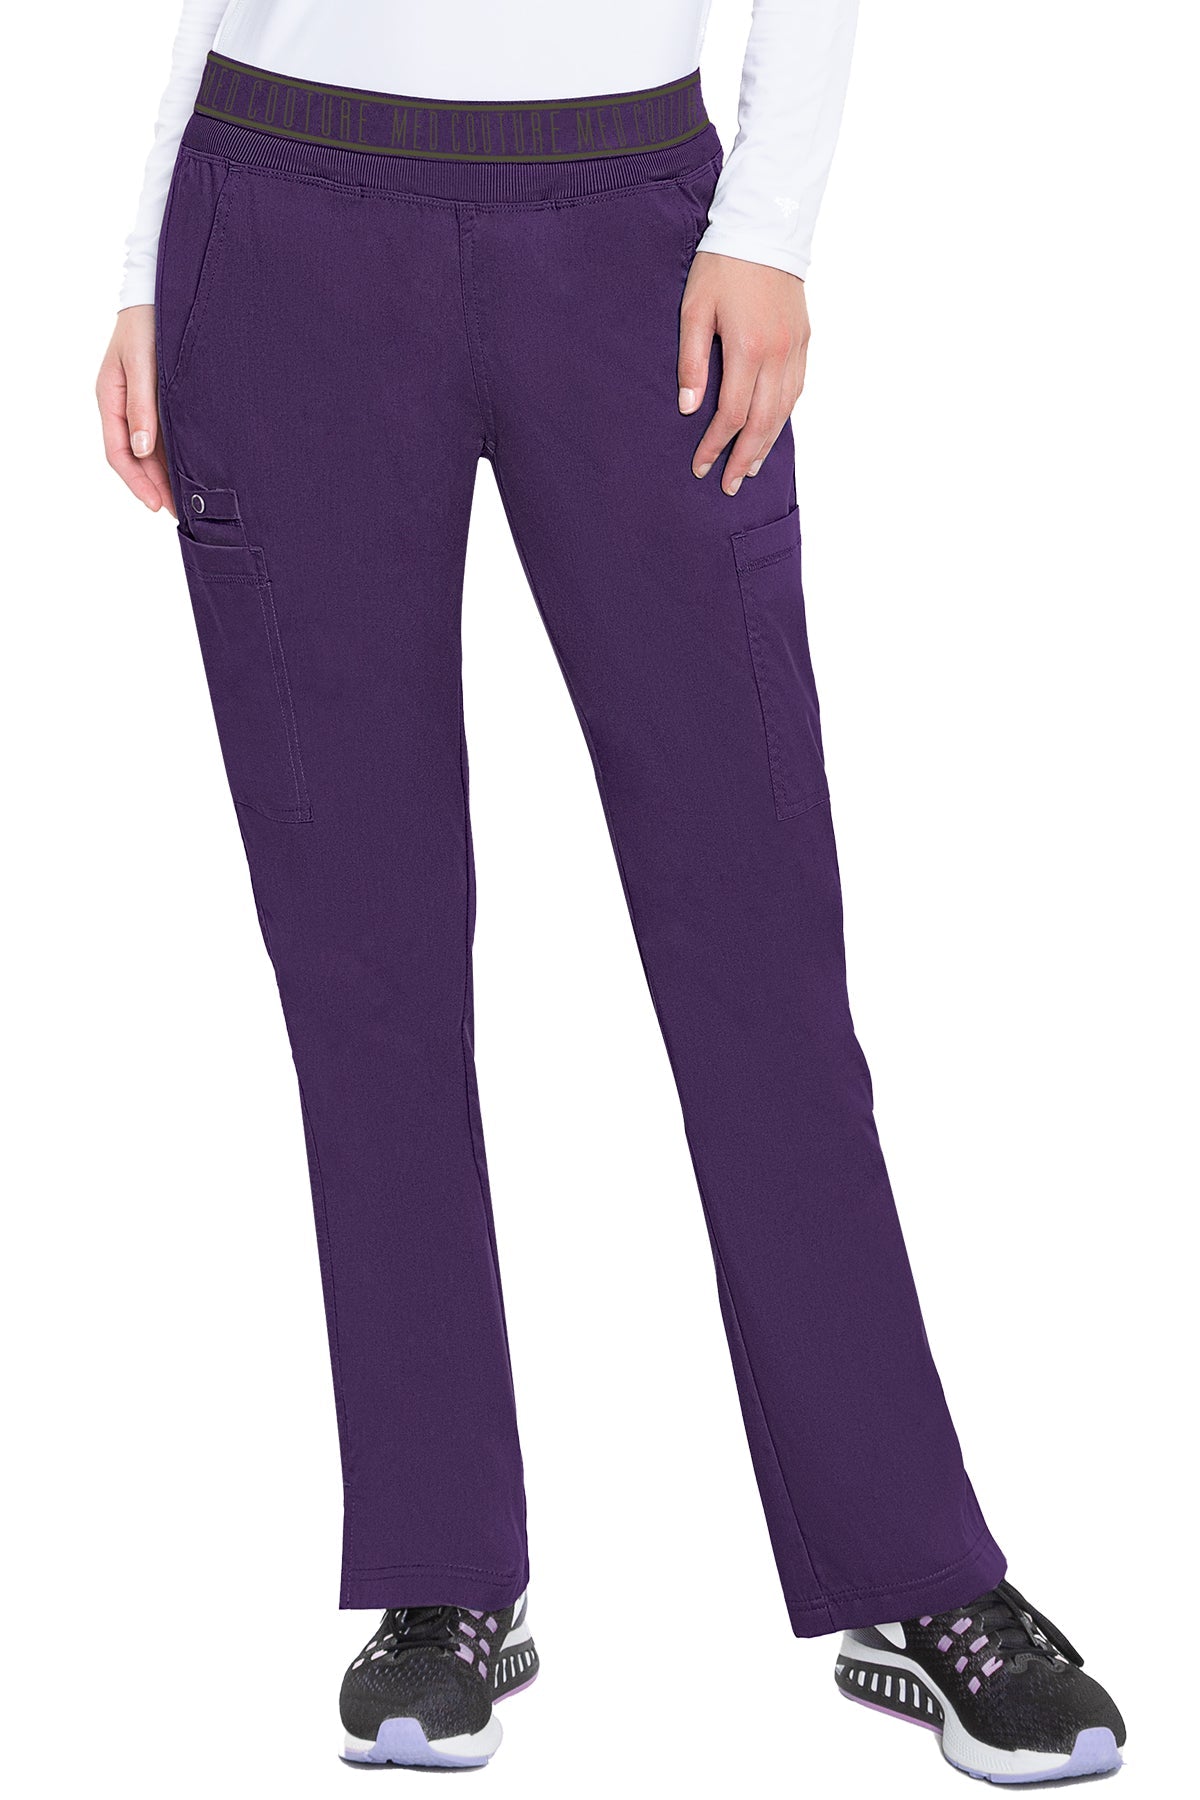 Med Couture 7739 YOGA 2 CARGO POCKET PANT (Size:XS-5X)